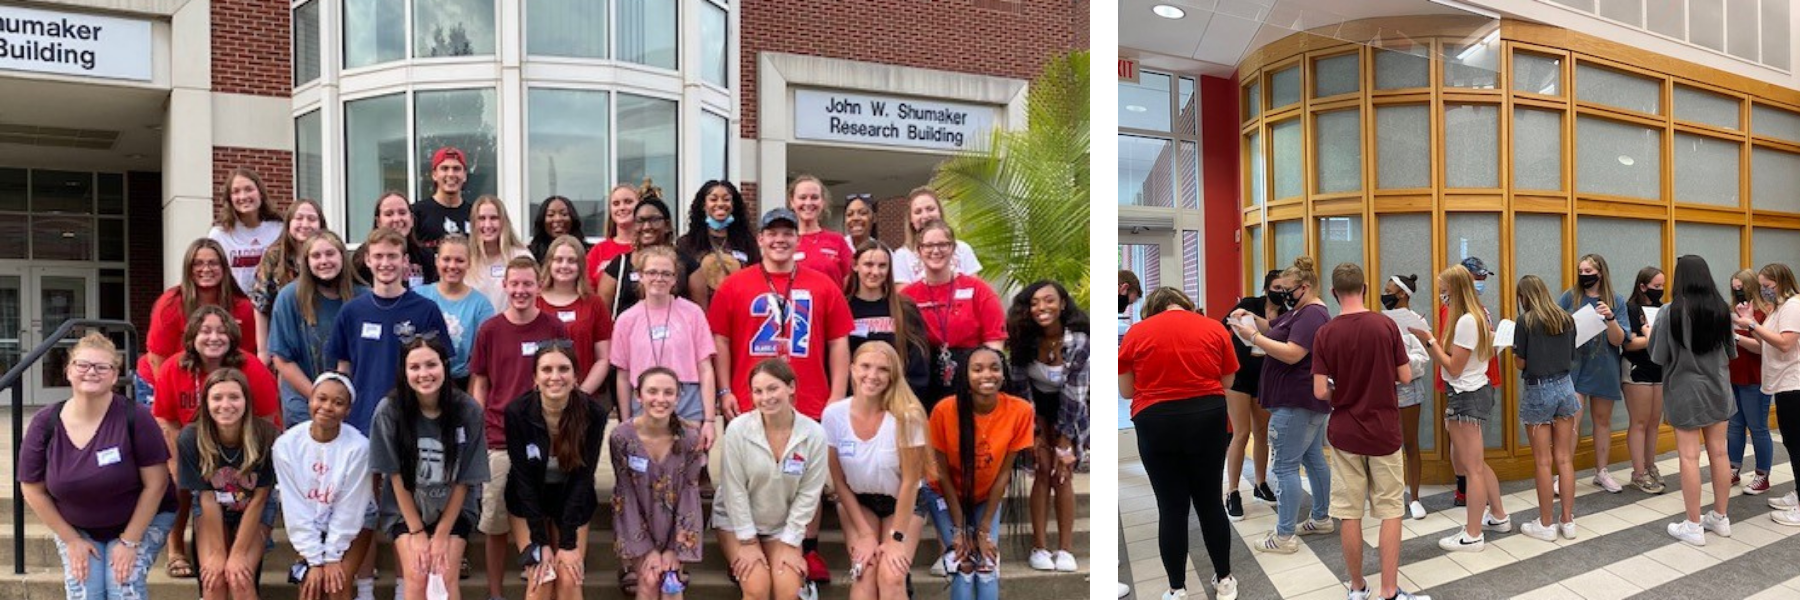 on the left image, students are standing in front of Shumaker Research Building and smiling. on the right image, students are engaging in an activity around campus